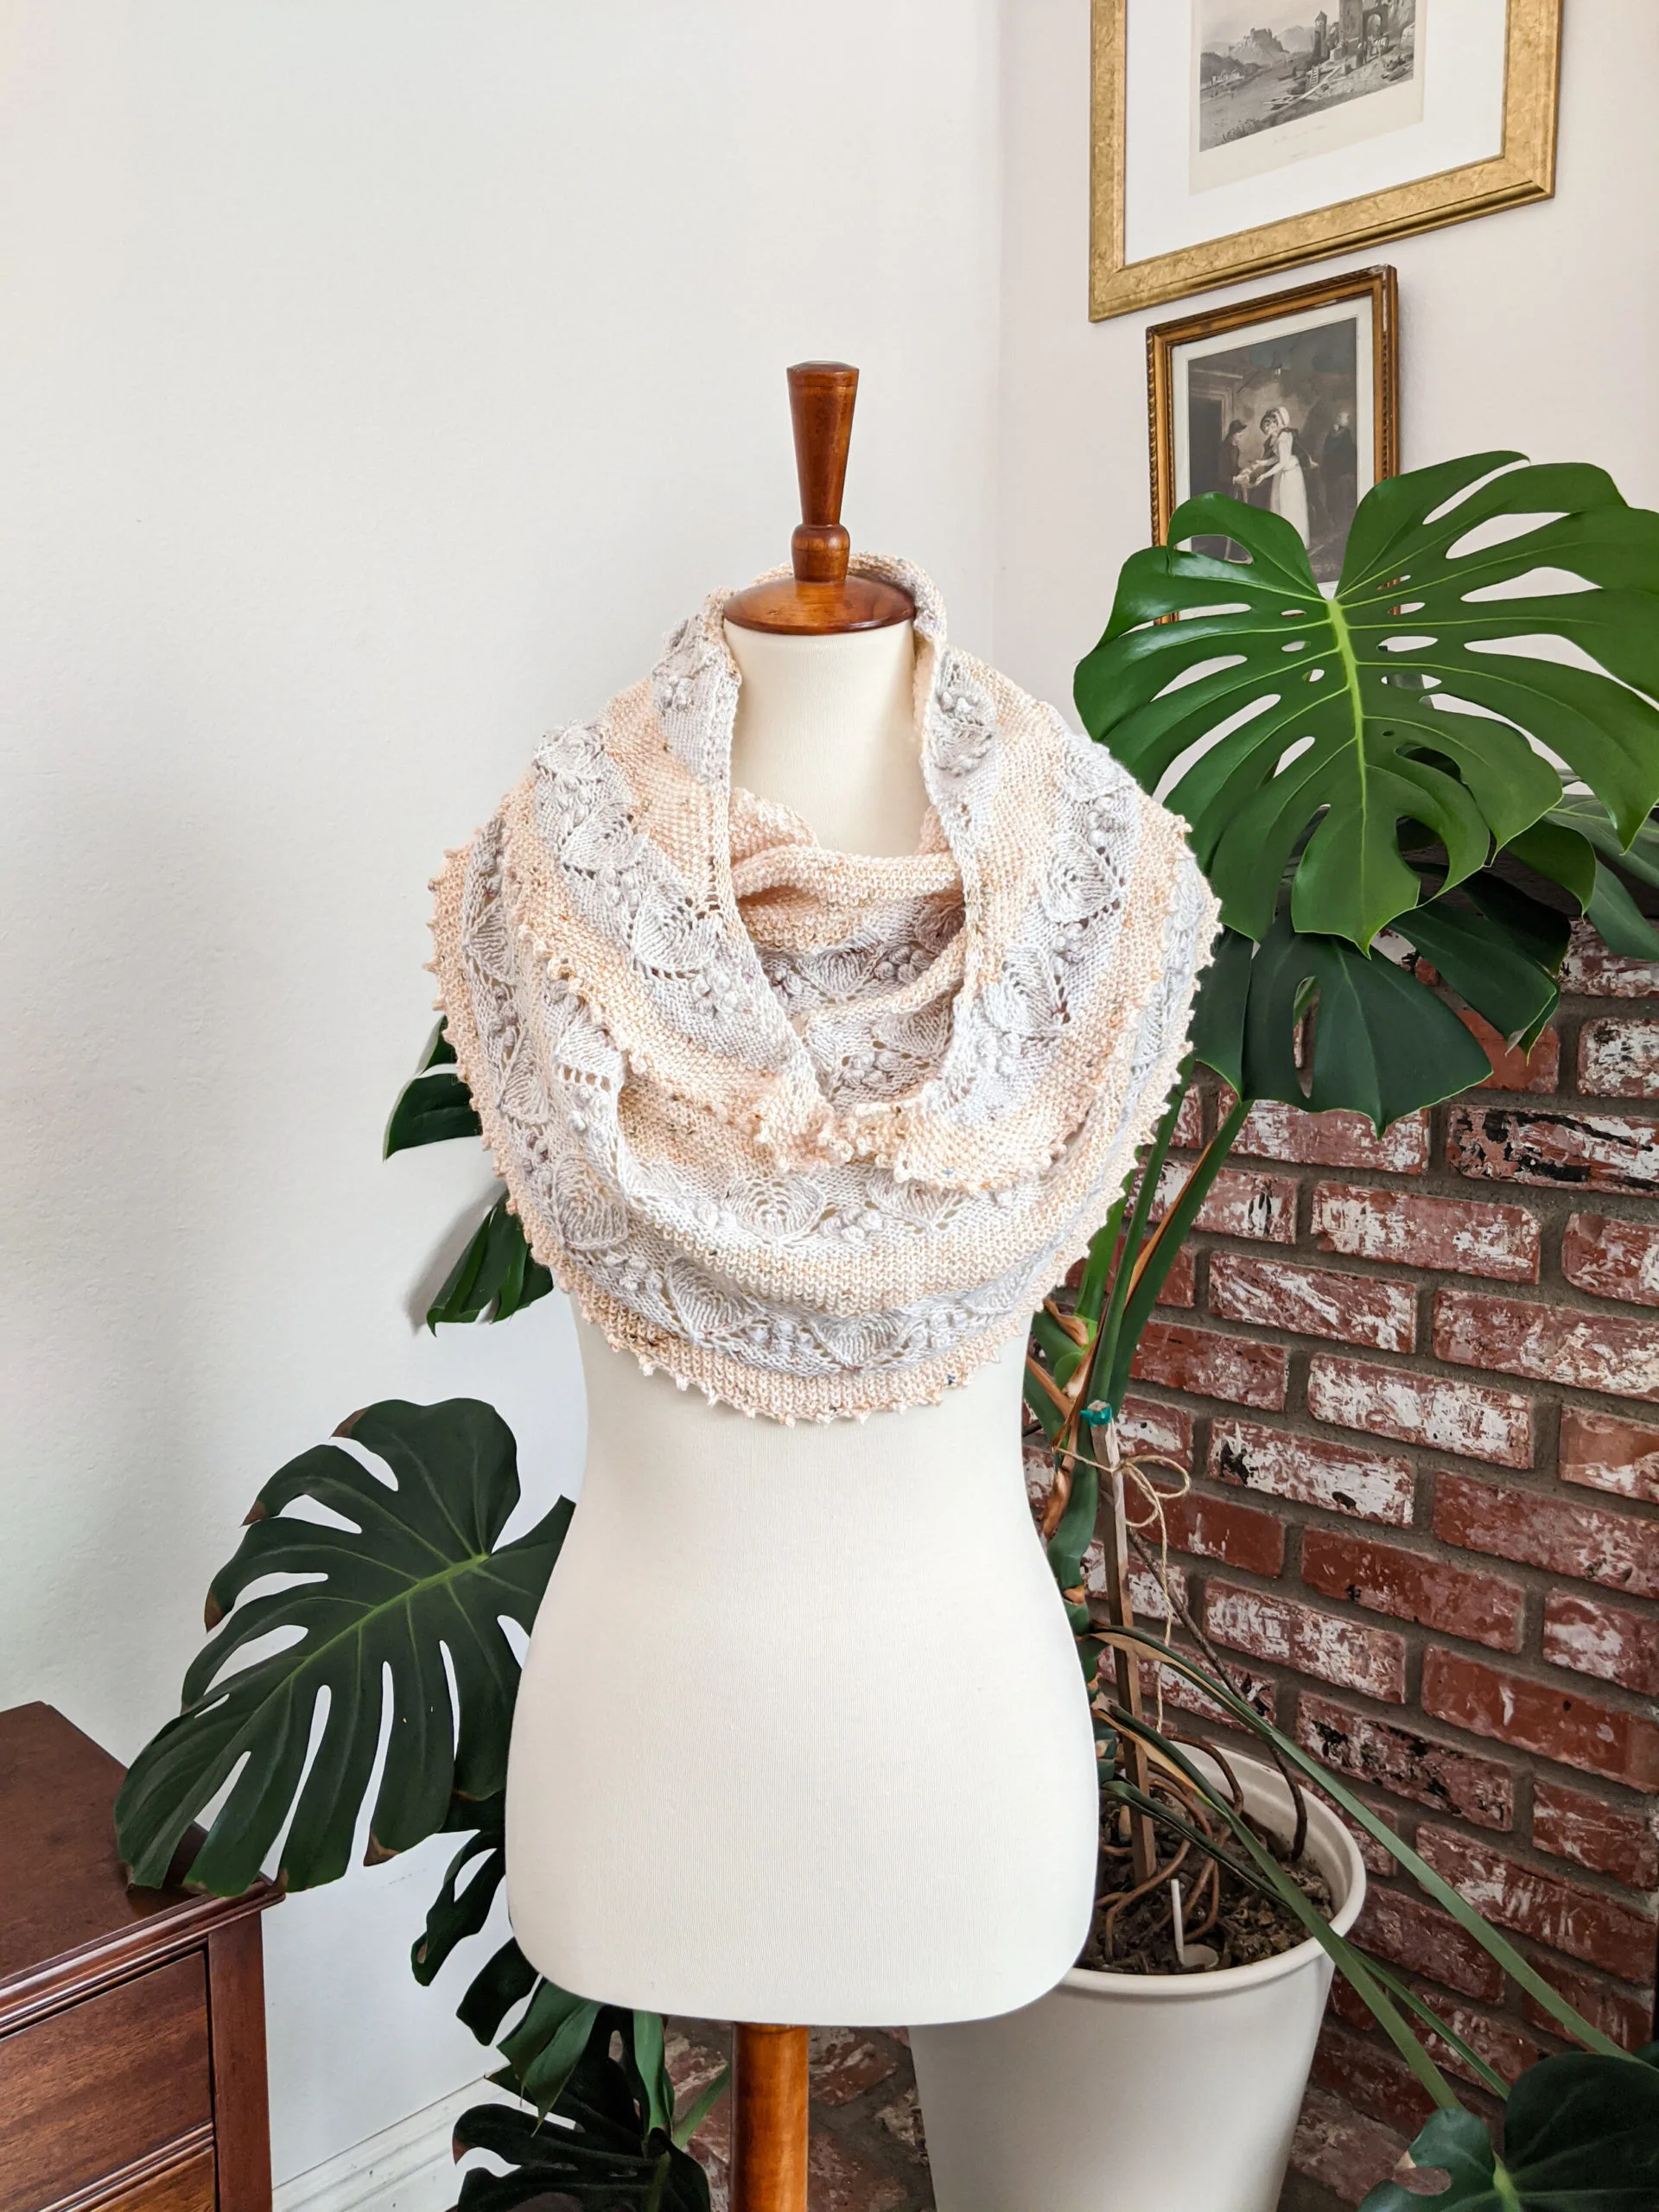 A crescent-shaped shawl in pale blue and yellow stripes is draped around the torso of a white dressmaker's form. In the background is a large monstera plant, a brick fireplace, and some framed antique prints on the walls.